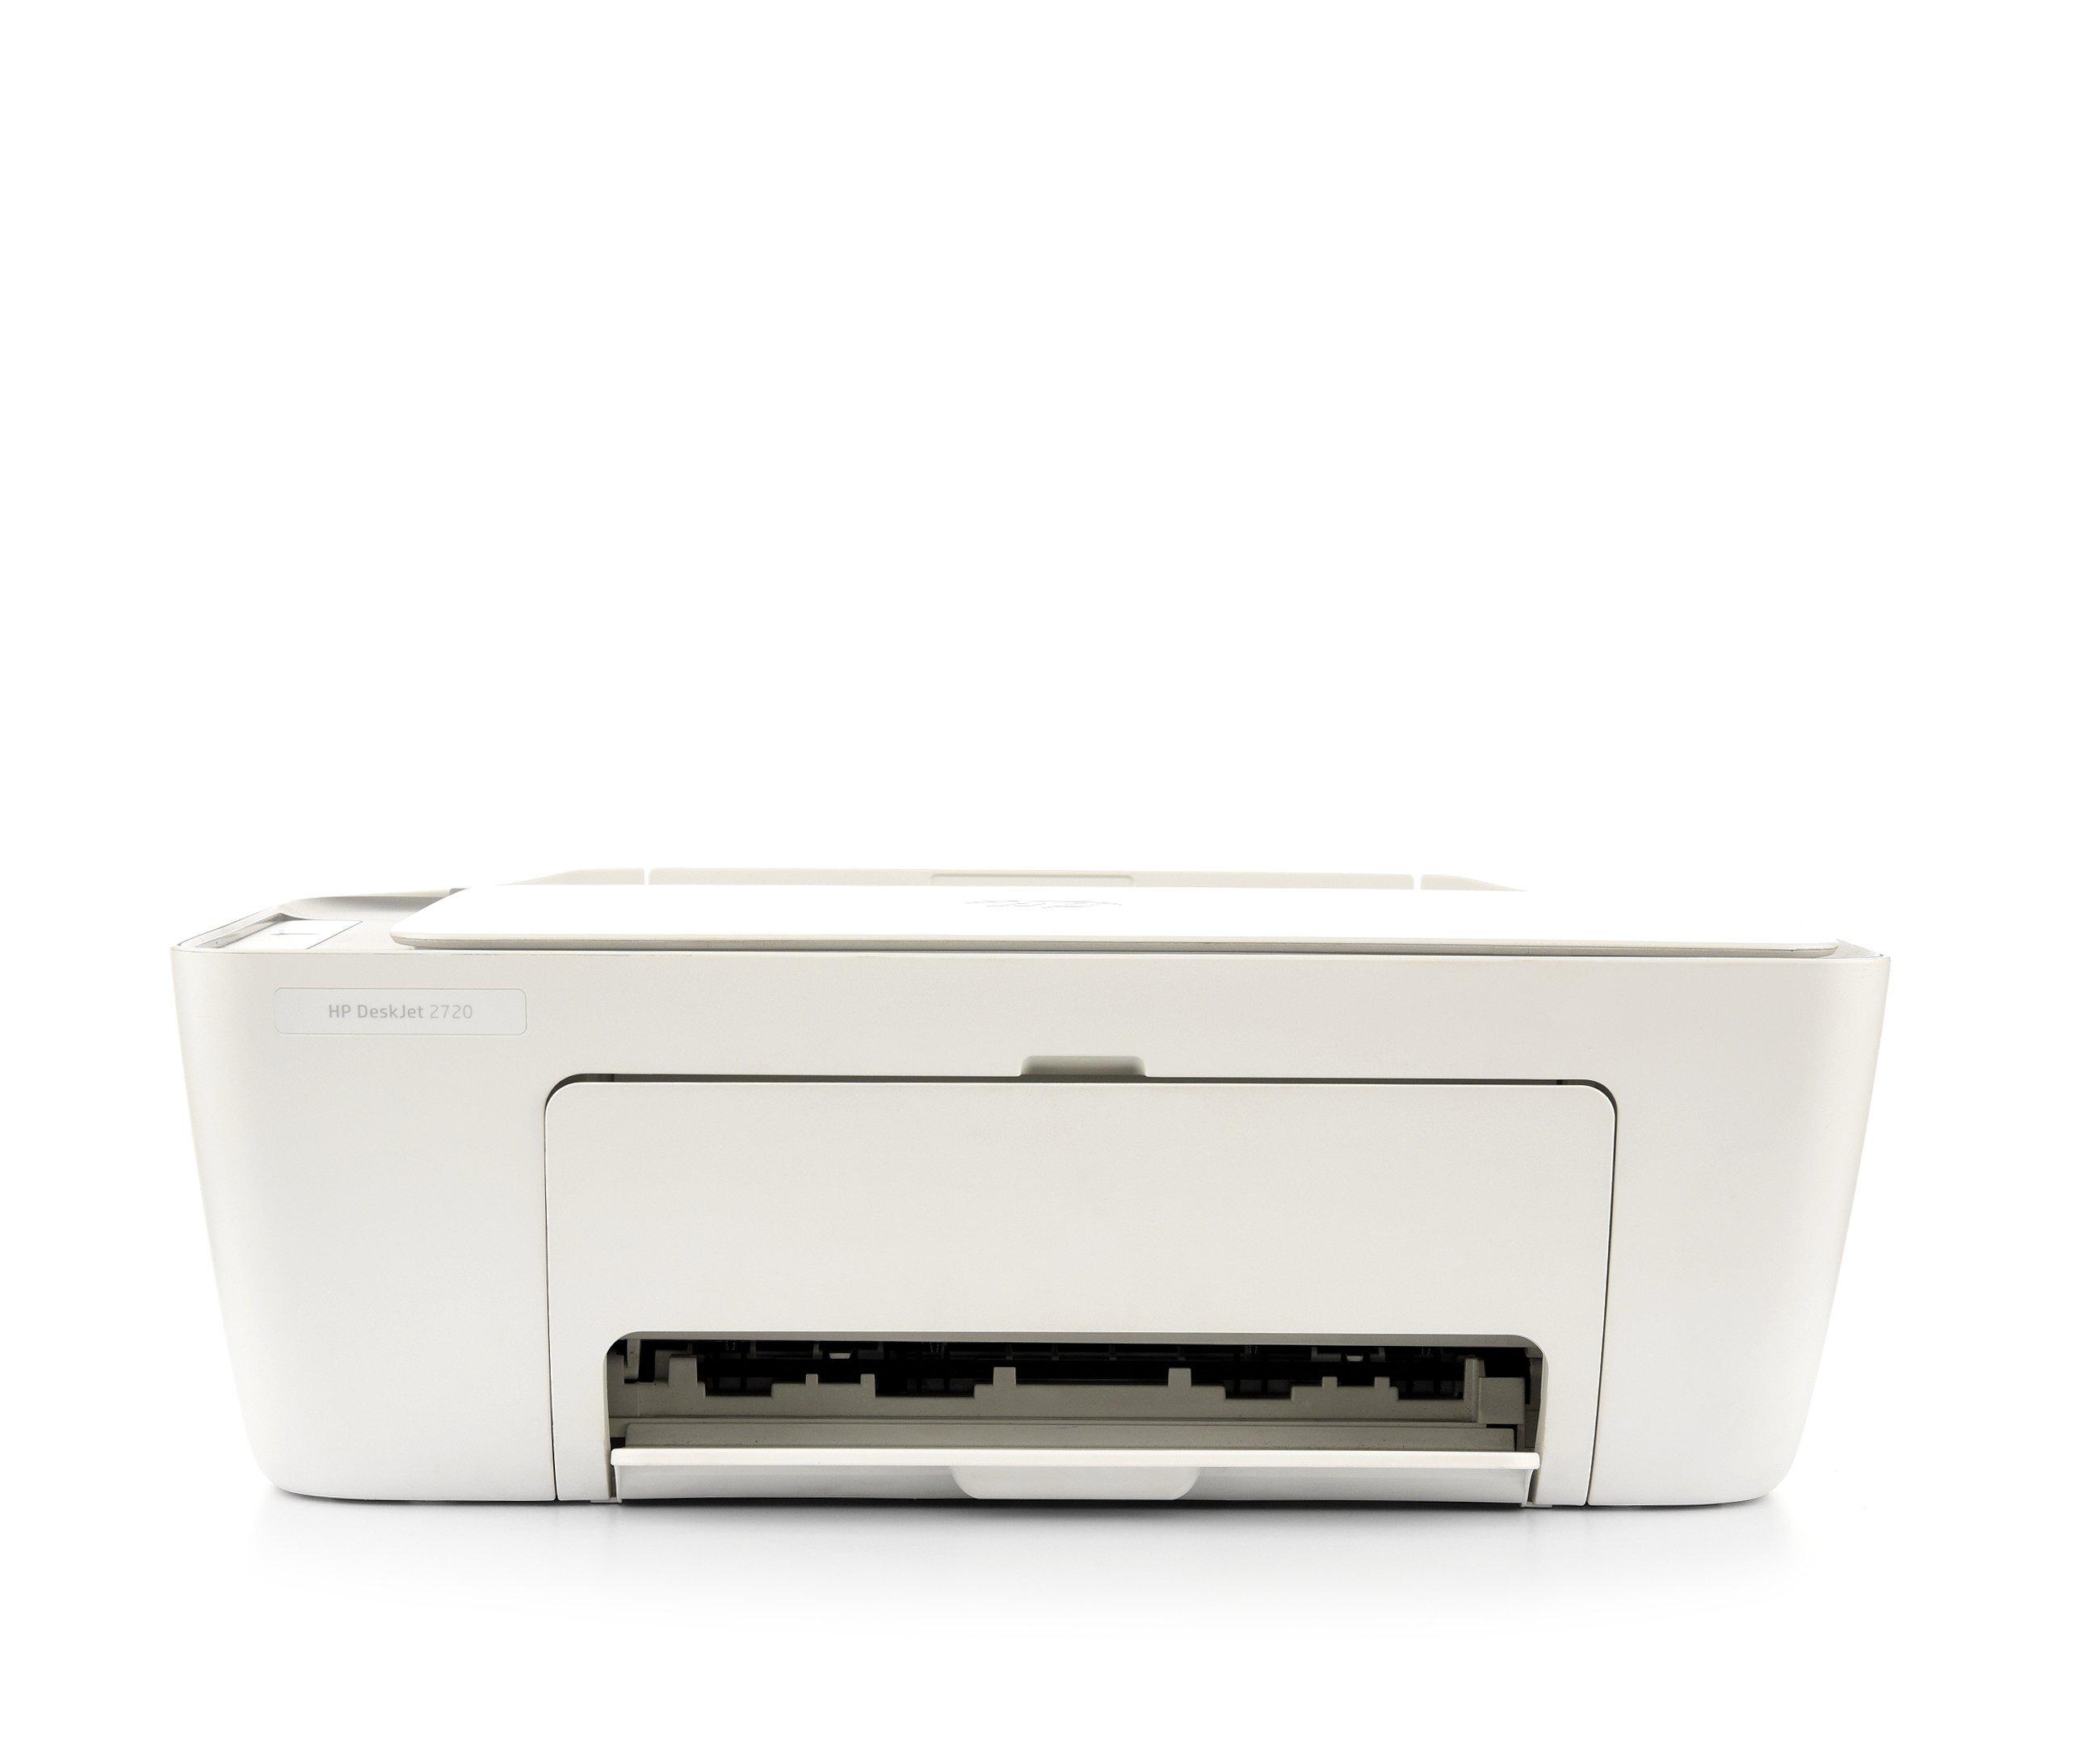 succes gispende sprogfærdighed HP DeskJet 2720 All-in-One Printer, Print, Copy, Scan, Wireless, White -  eXtra Saudi